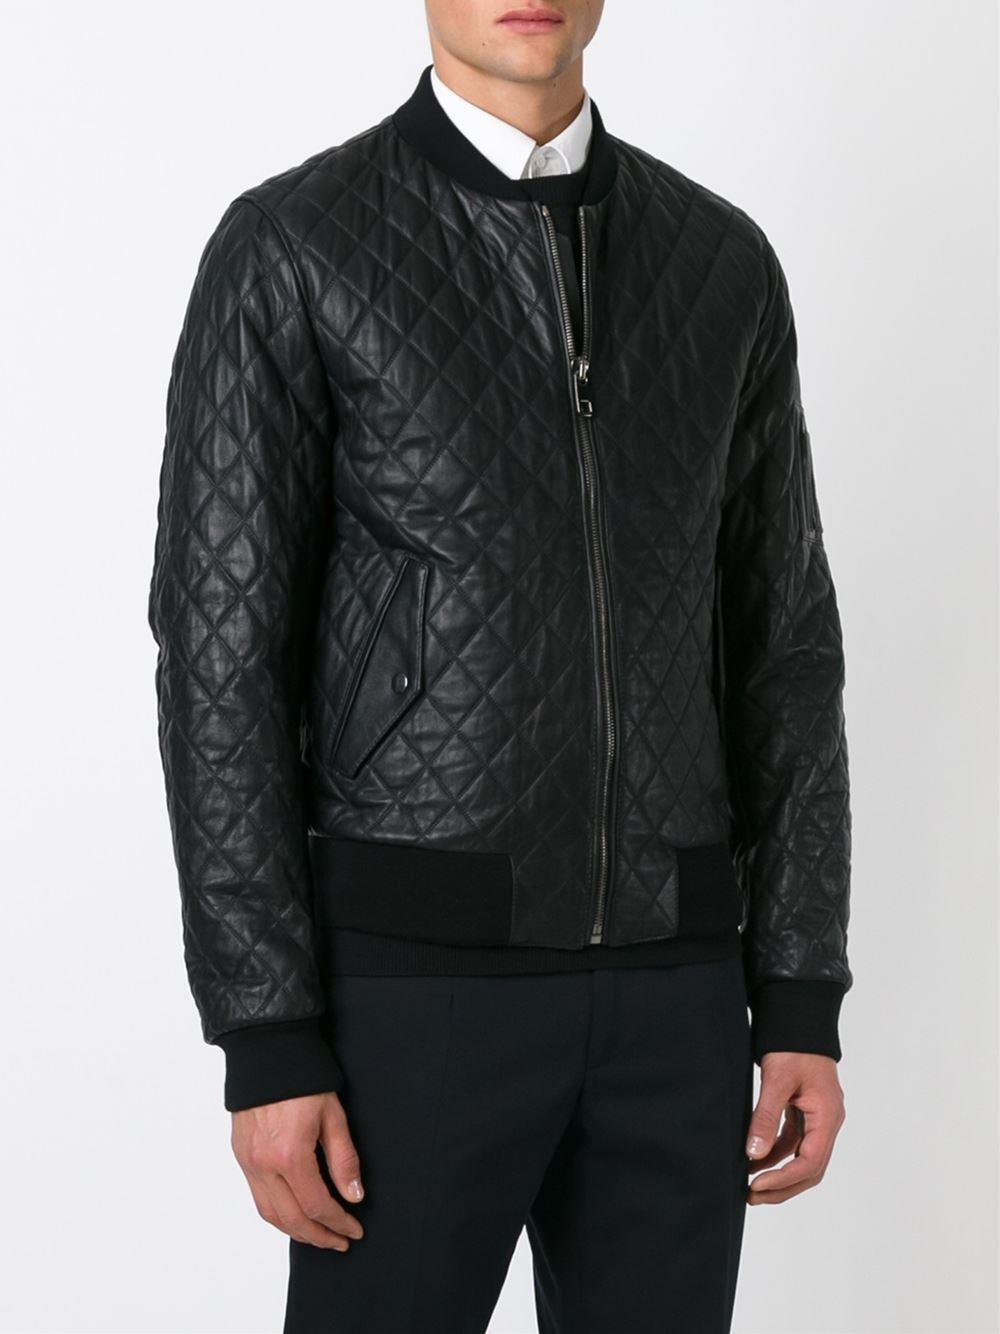 Dolce & gabbana Quilted Leather Bomber Jacket in Black | Lyst